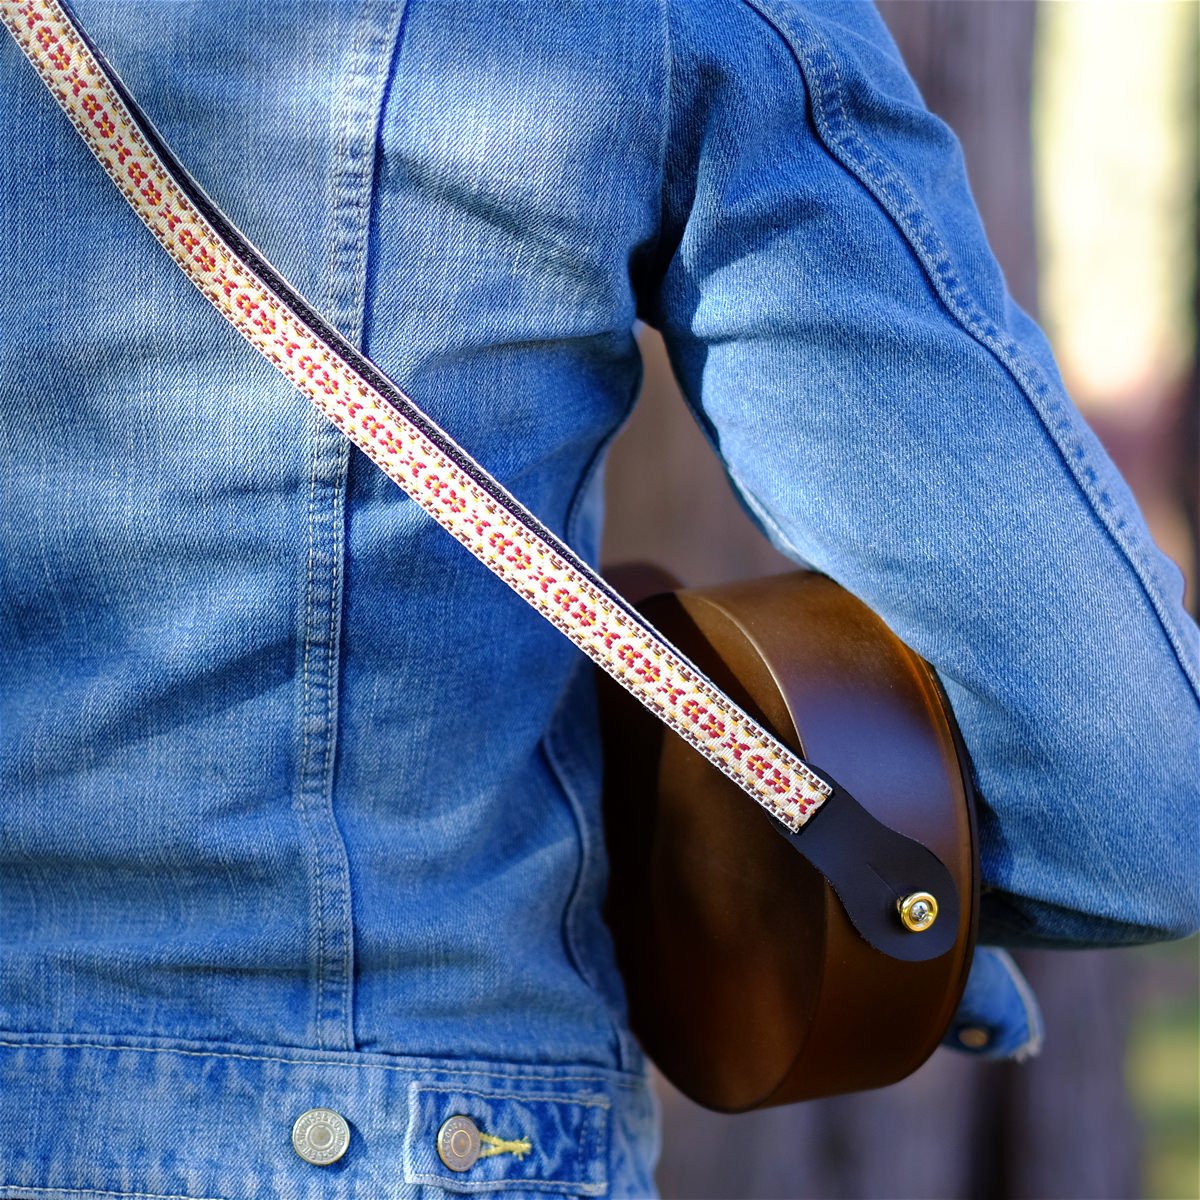 How to attach a strap to a guitar - Levys Leathers